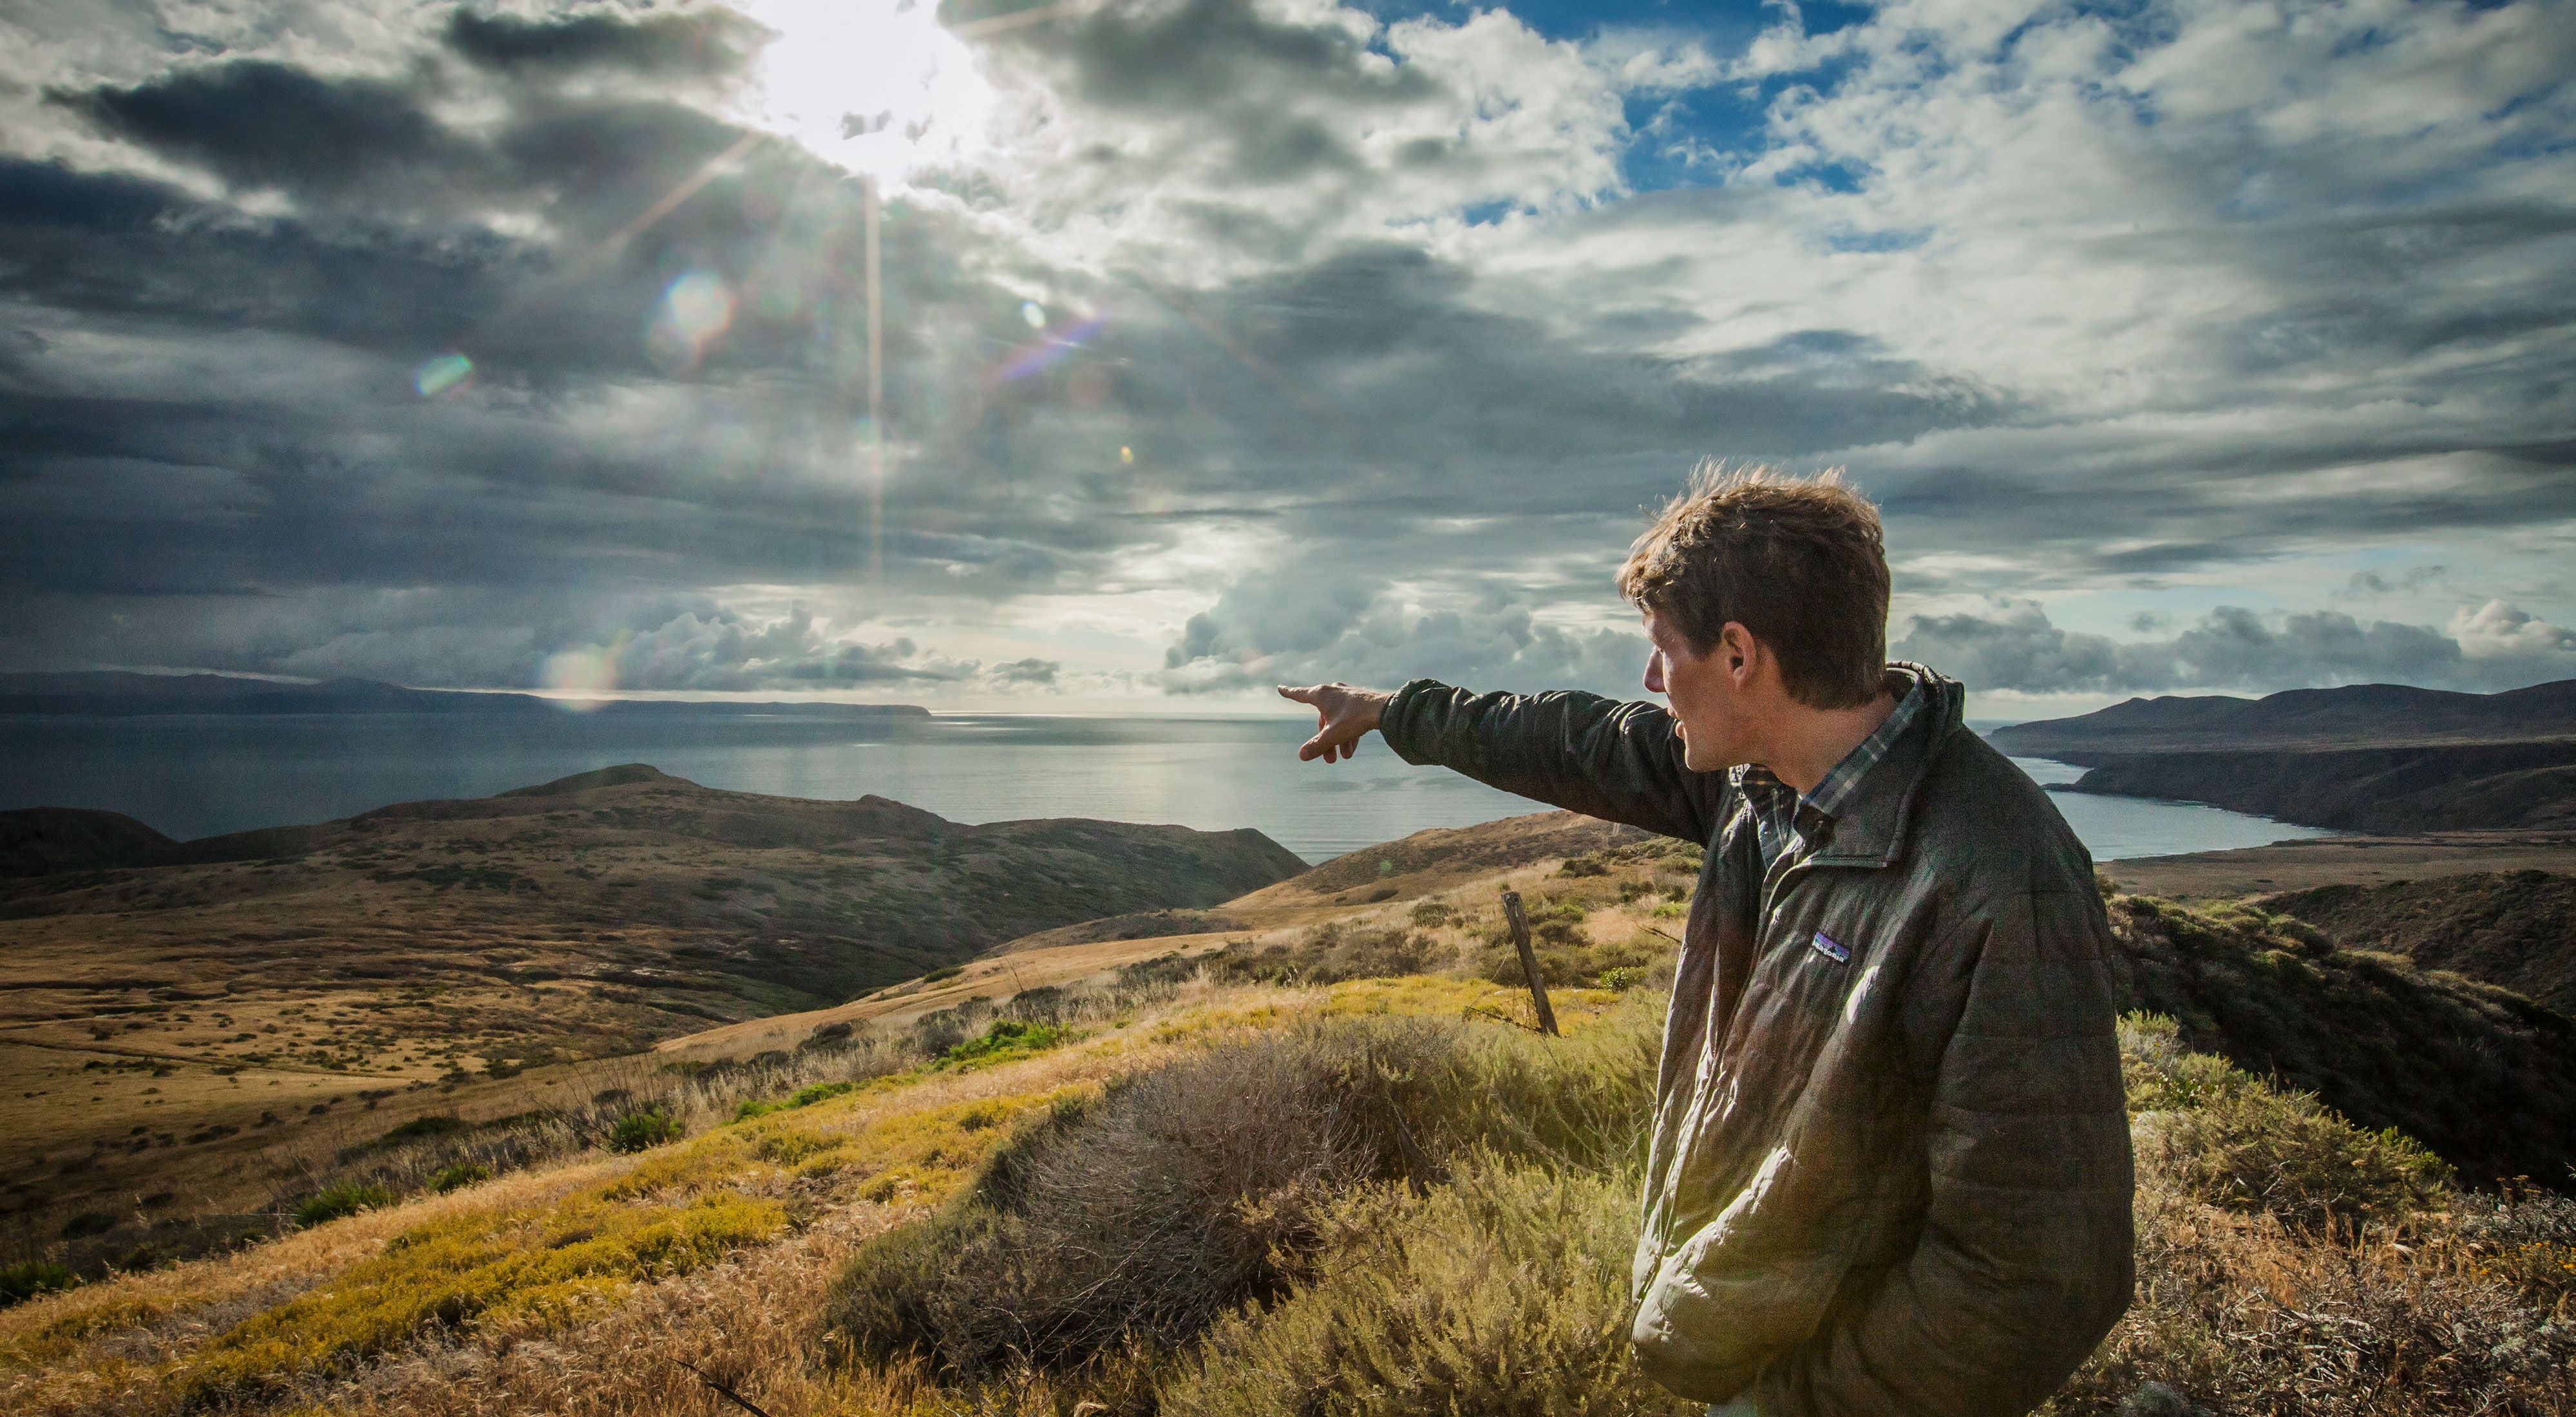 A man stands on a bluff at sunset and points out towards the ocean over grassy hills.